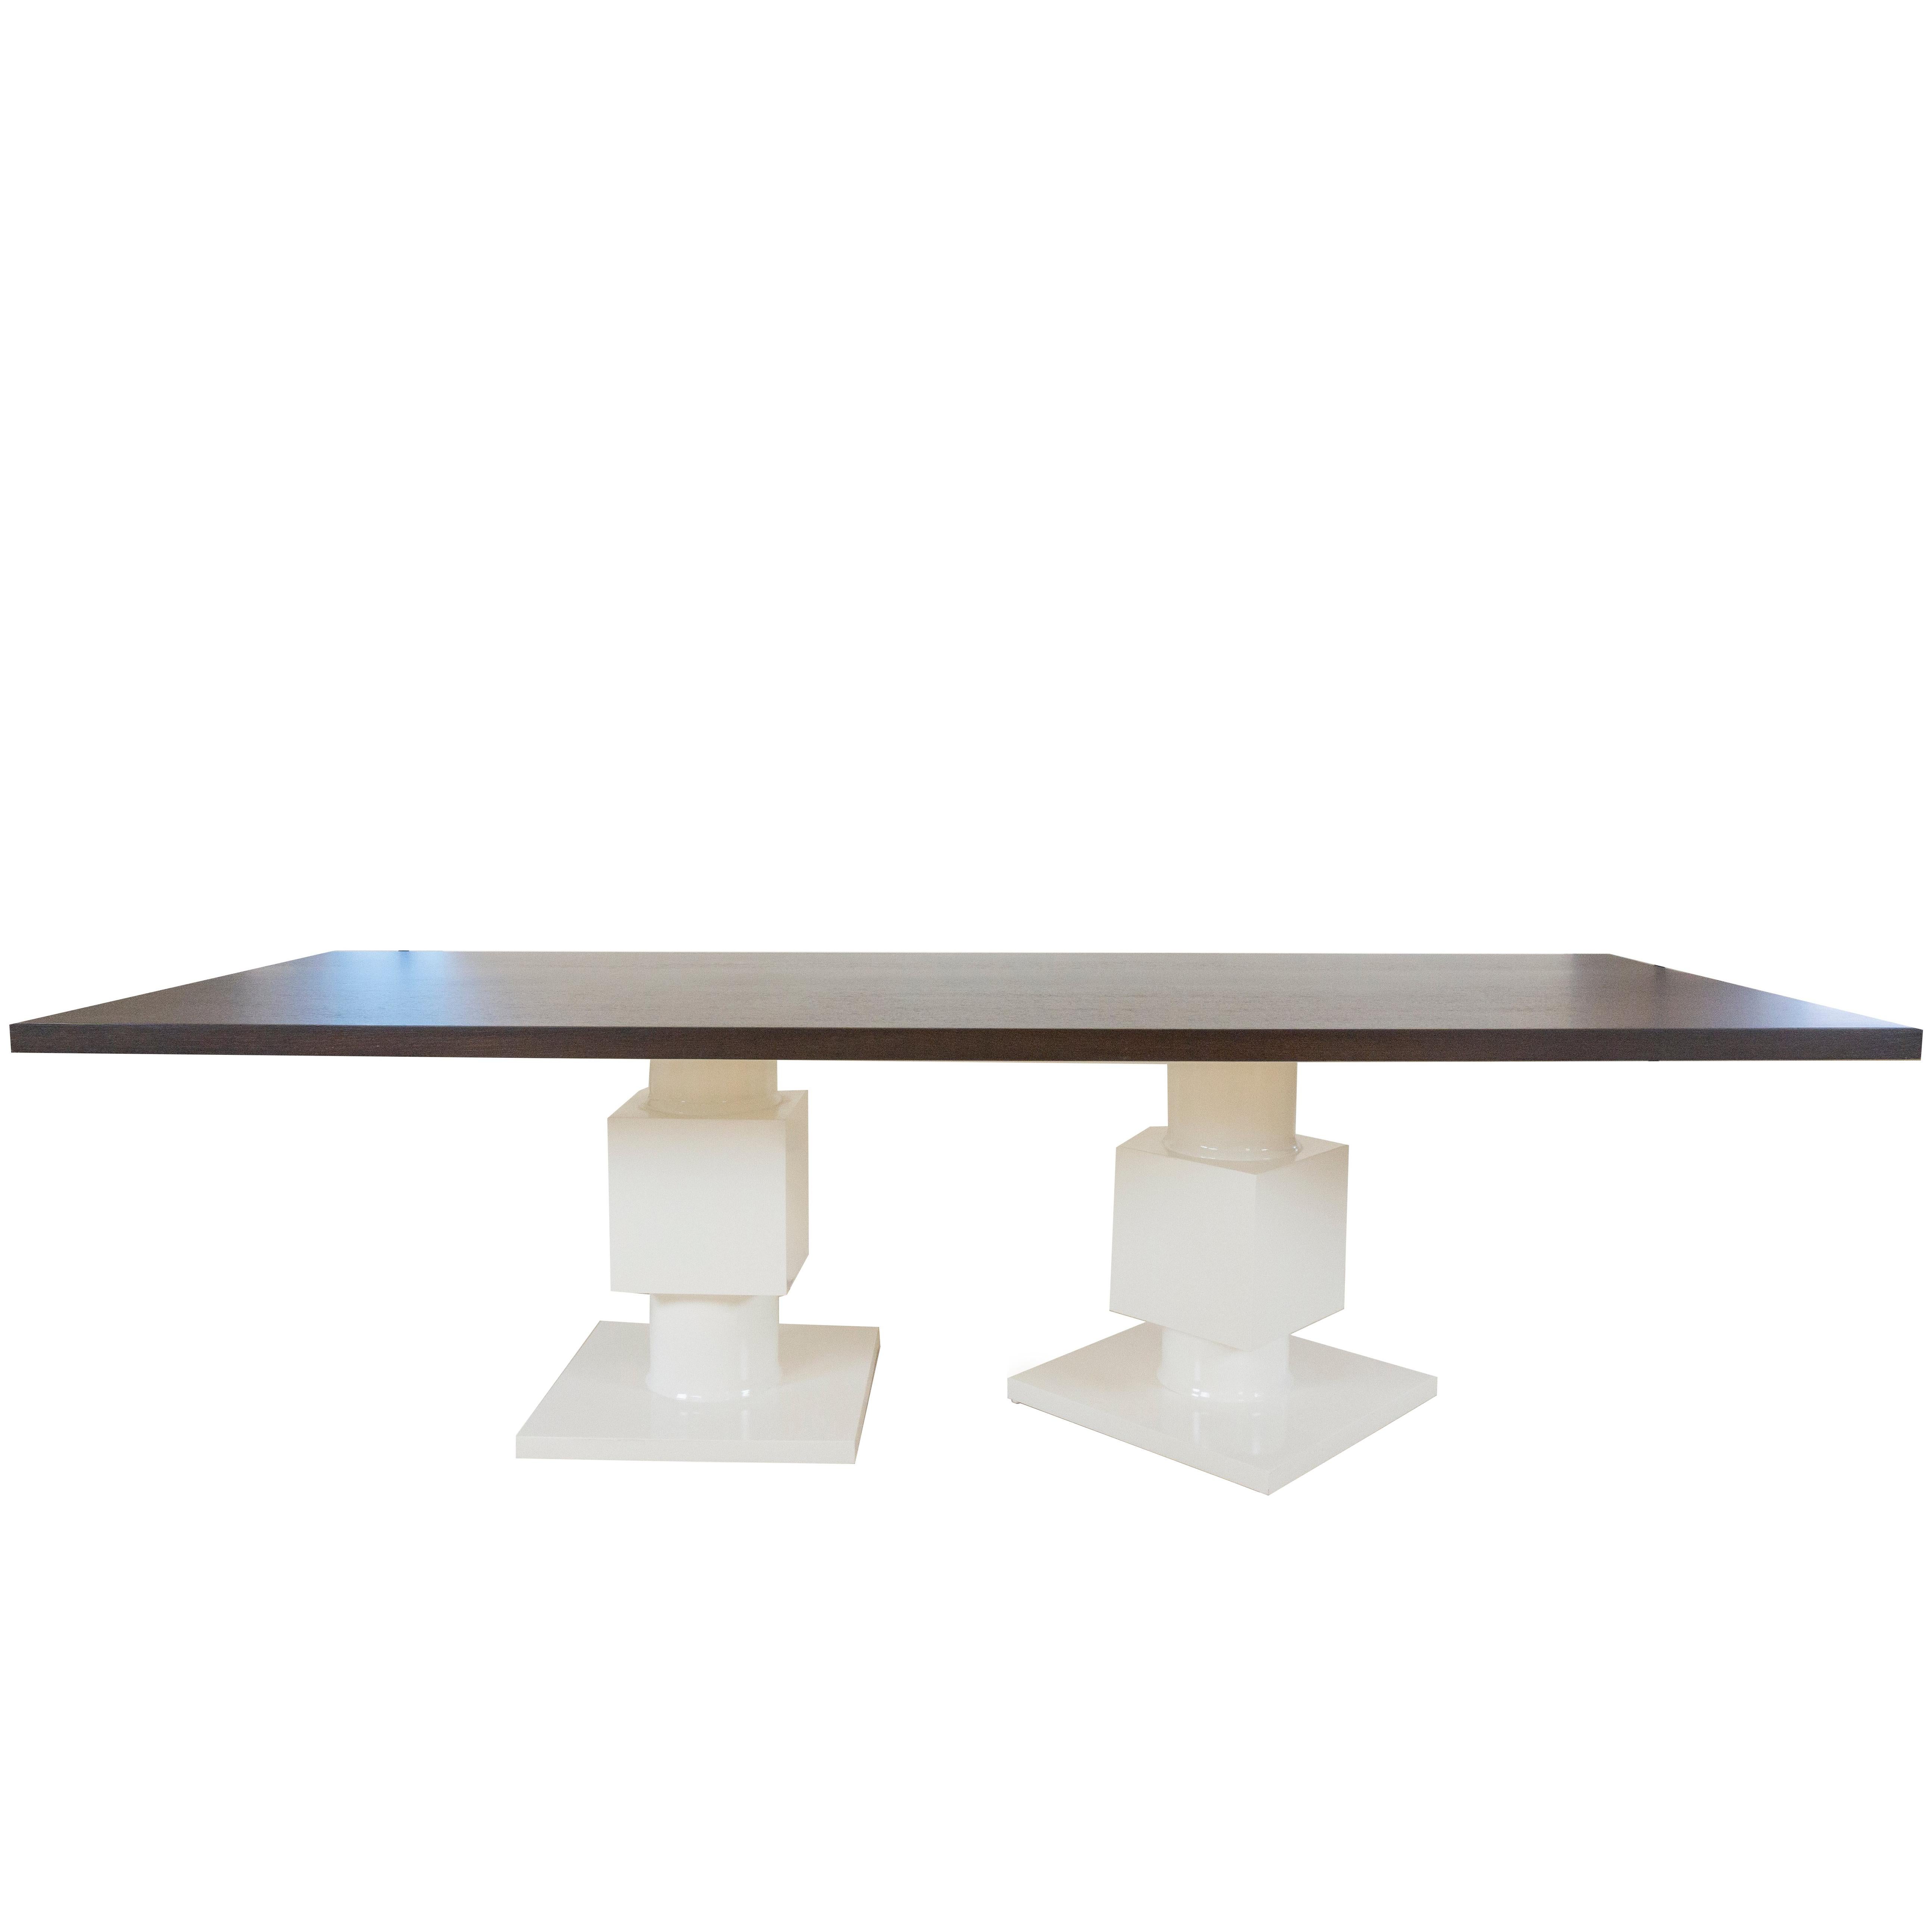 This large modern dining table is a whimsical take on our popular Gabietta table. The wenge wood top has an oil finish and is visually striking and durable and the base has asymmetrical legs lacquered in white. 

Measurements:

108